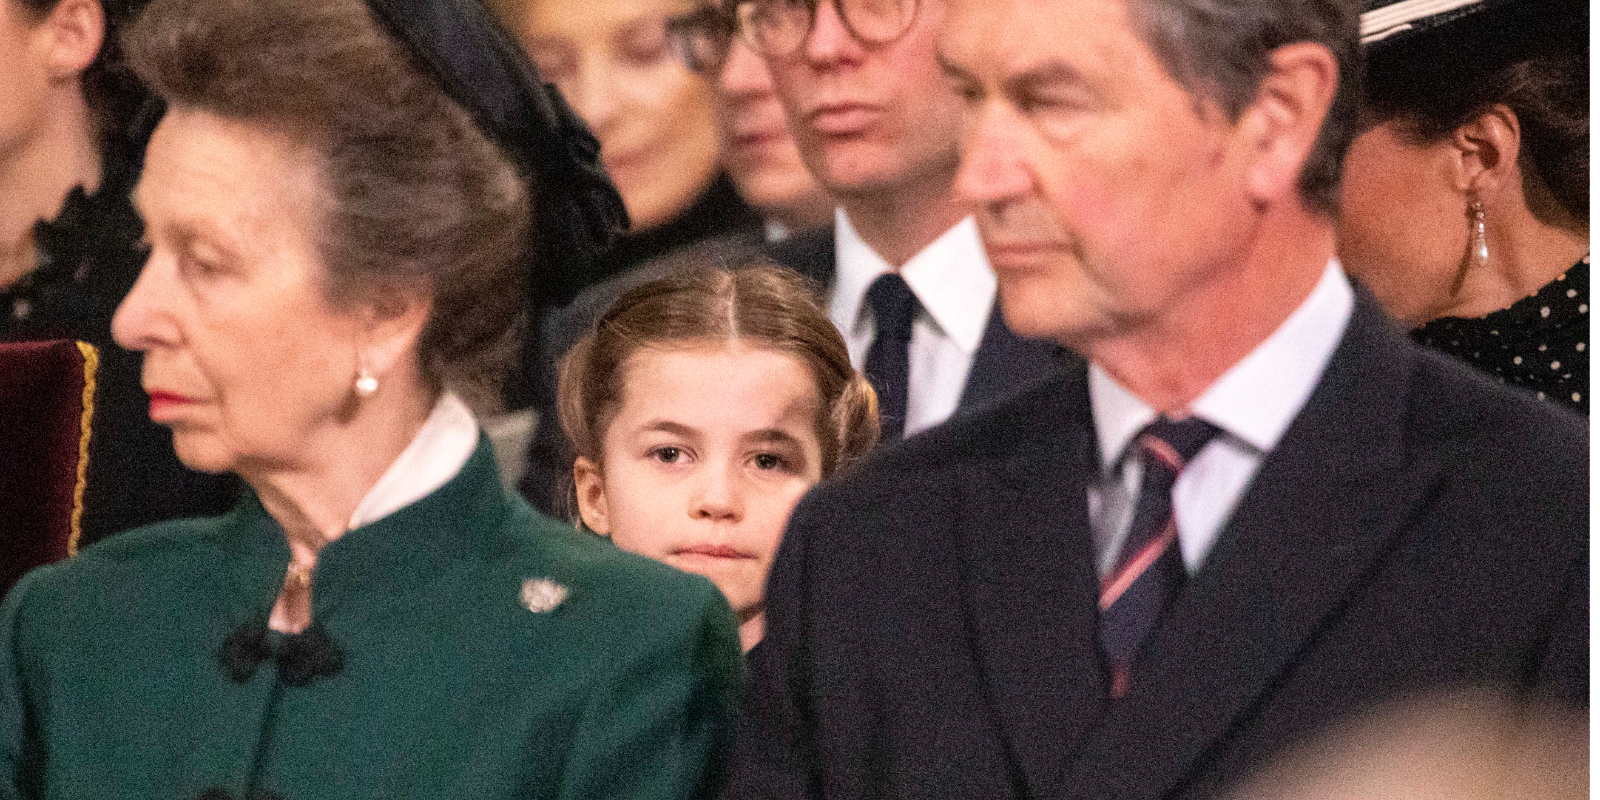 Princess Anne, Princess Royal and Princess Charlotte of Cambridge take their seats at Westminster Abbey for the Service of Thanksgiving for the Duke of Edinburgh on March 29, 2022 in London, England.